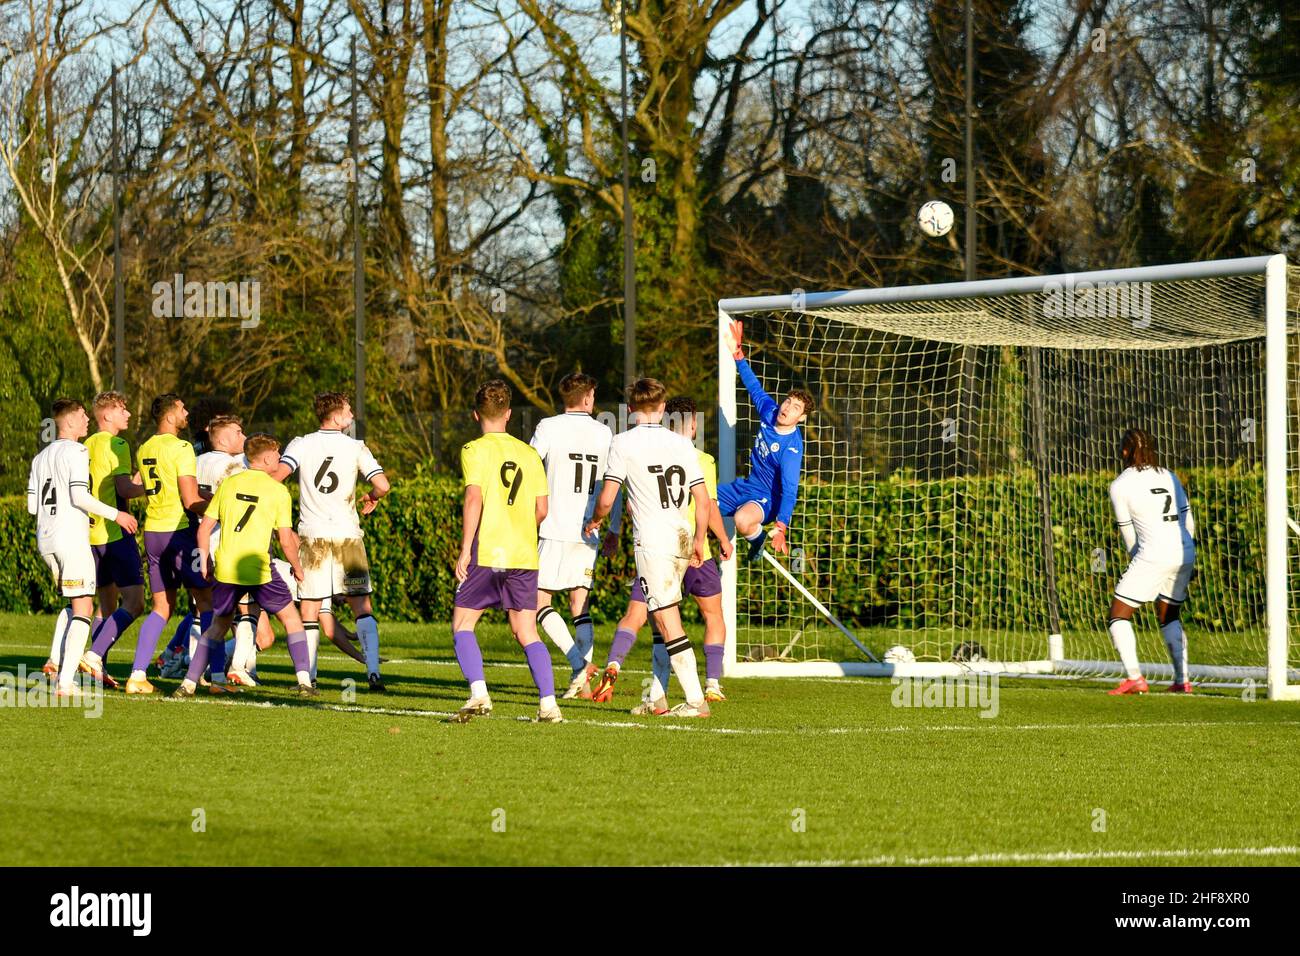 Swansea, Wales. 14 January, 2022. Action during the Premier League Cup game between Swansea City Under 23s and Exeter City Under 23s at the Swansea City Academy in Swansea, Wales, UK on 14 January 2022. Credit: Duncan Thomas/Majestic Media. Credit: Majestic Media Ltd/Alamy Live News Stock Photo